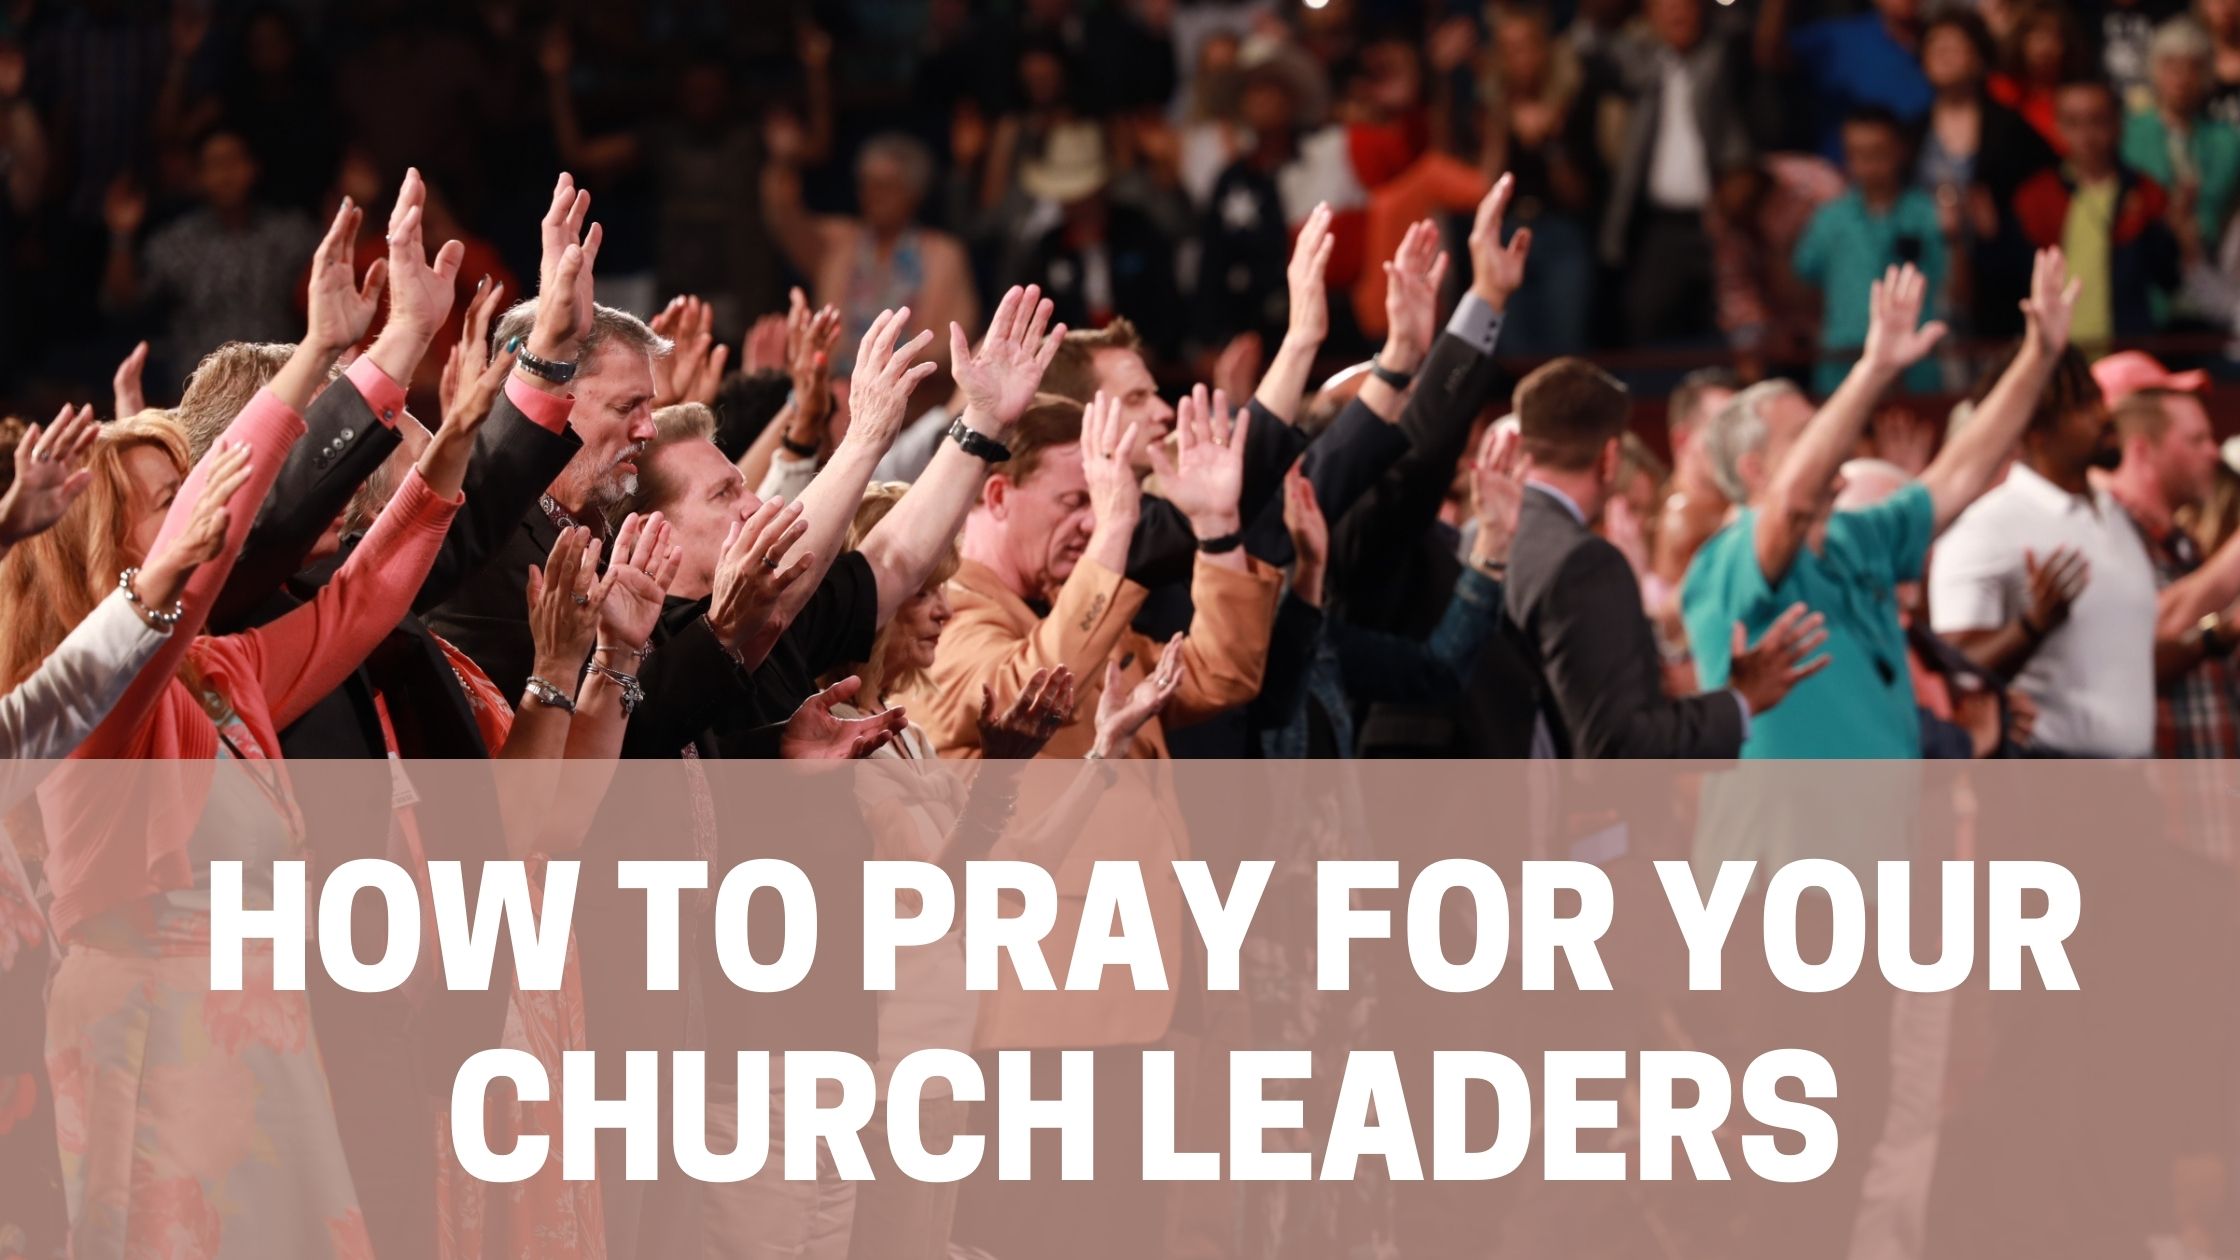 How to pray for your church leaders